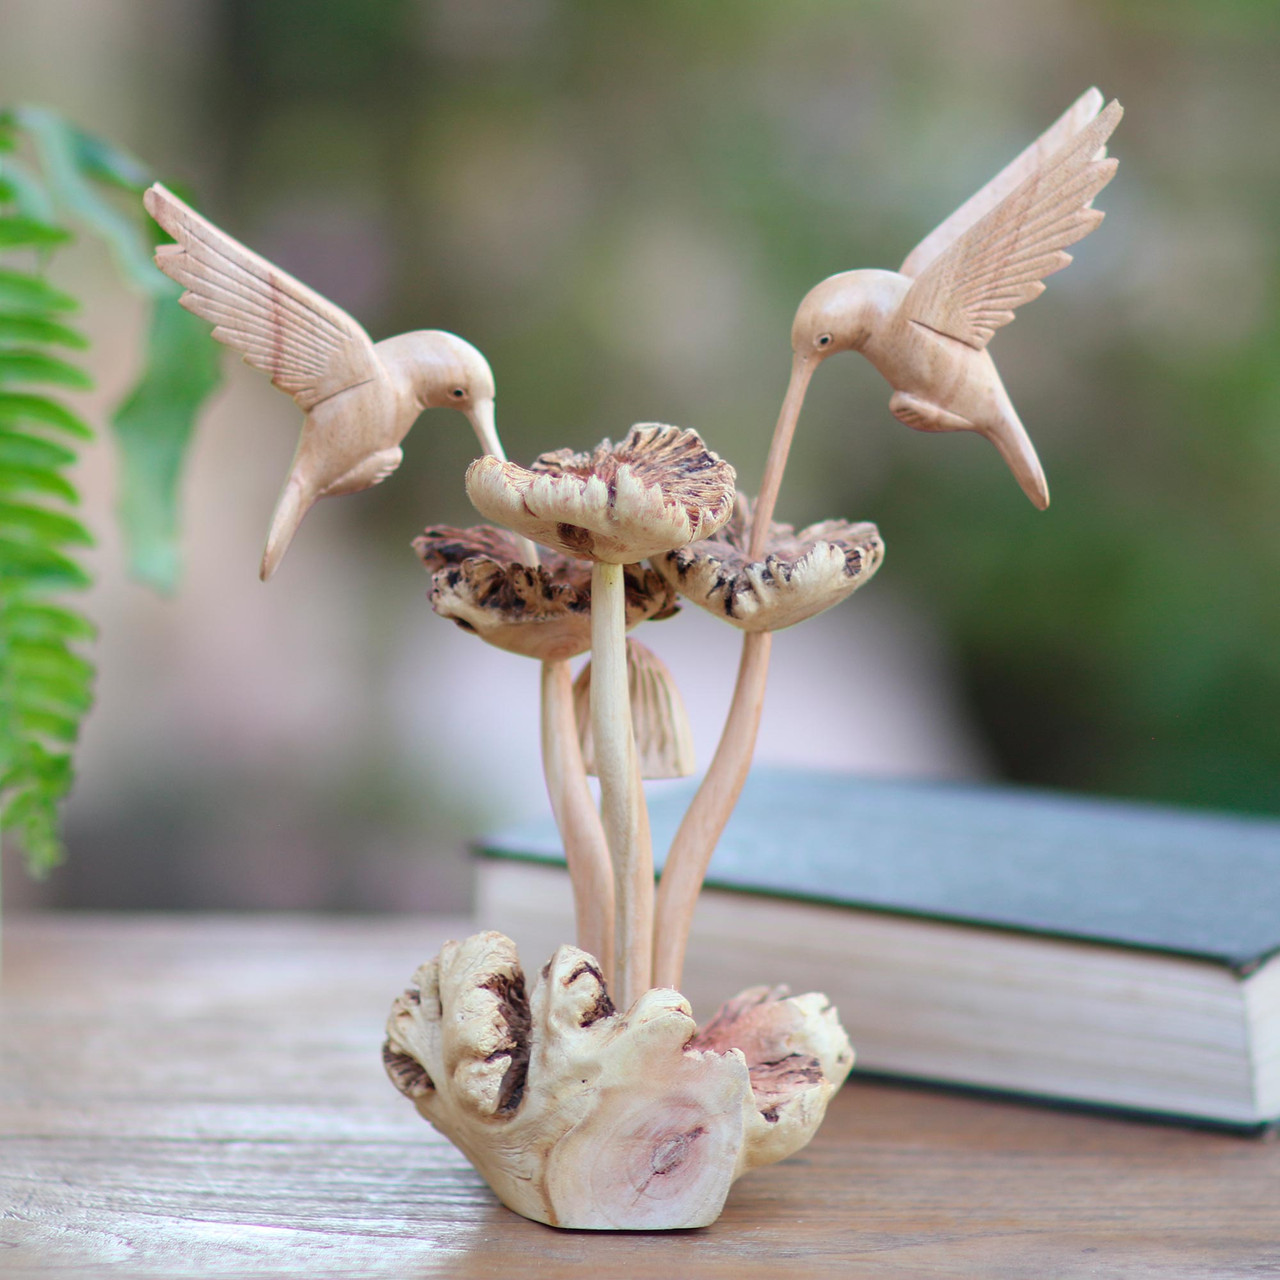 Unique Wood Sculpture of Hummingbirds and Mushrooms 'Hummingbirds and  Mushrooms' - International Medical Corps